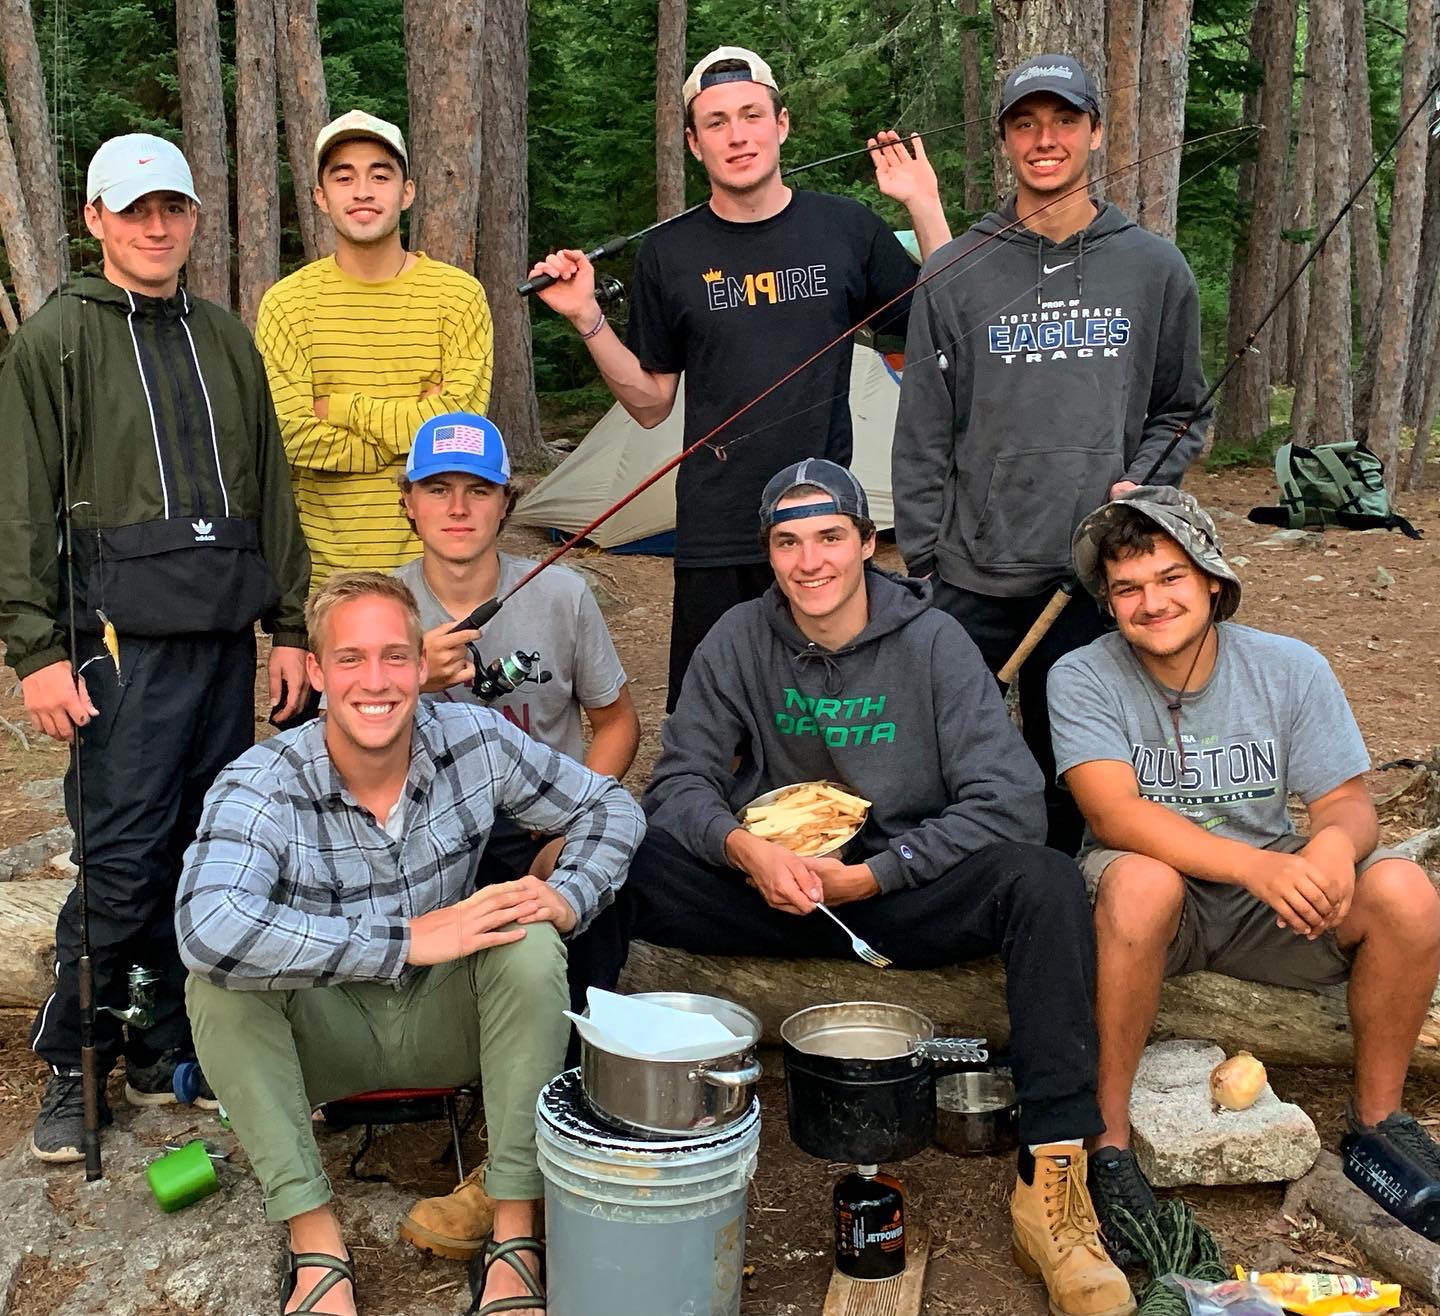 Michael Kelly (bottom left) leading a Boundary Waters trip for young men